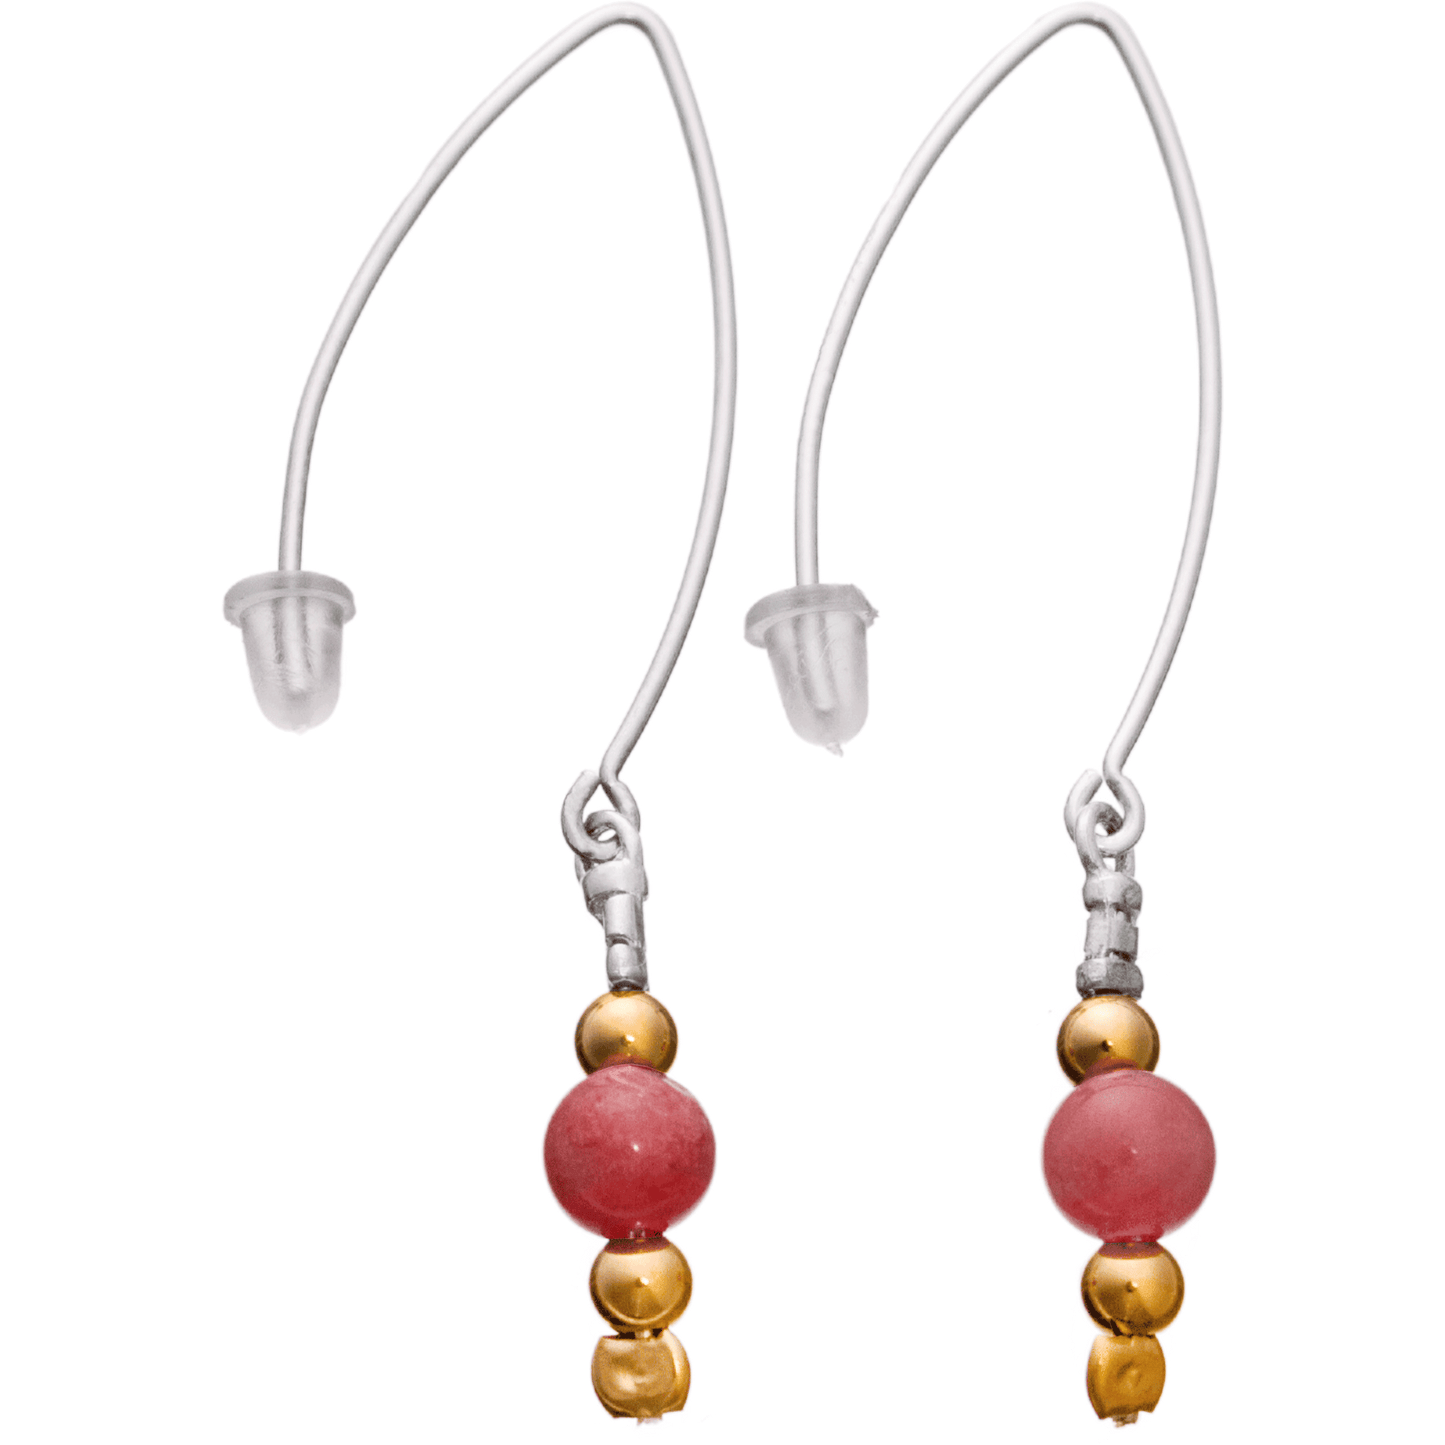 Threader earrings with blush-colored and gold beads